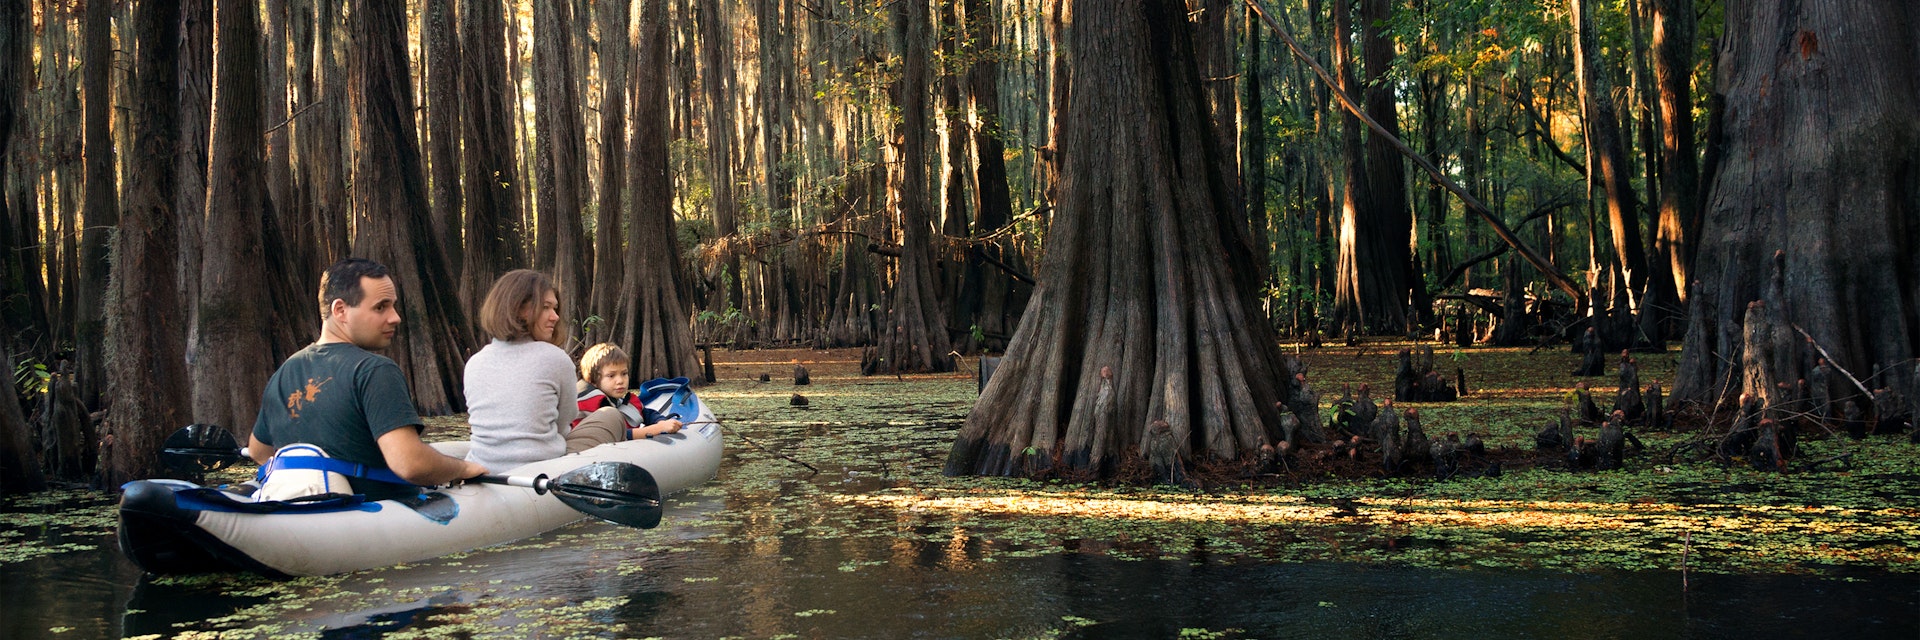 Family in an inflatable boat floats among the cypresses. Caddo Lake State Park, Texas, United States